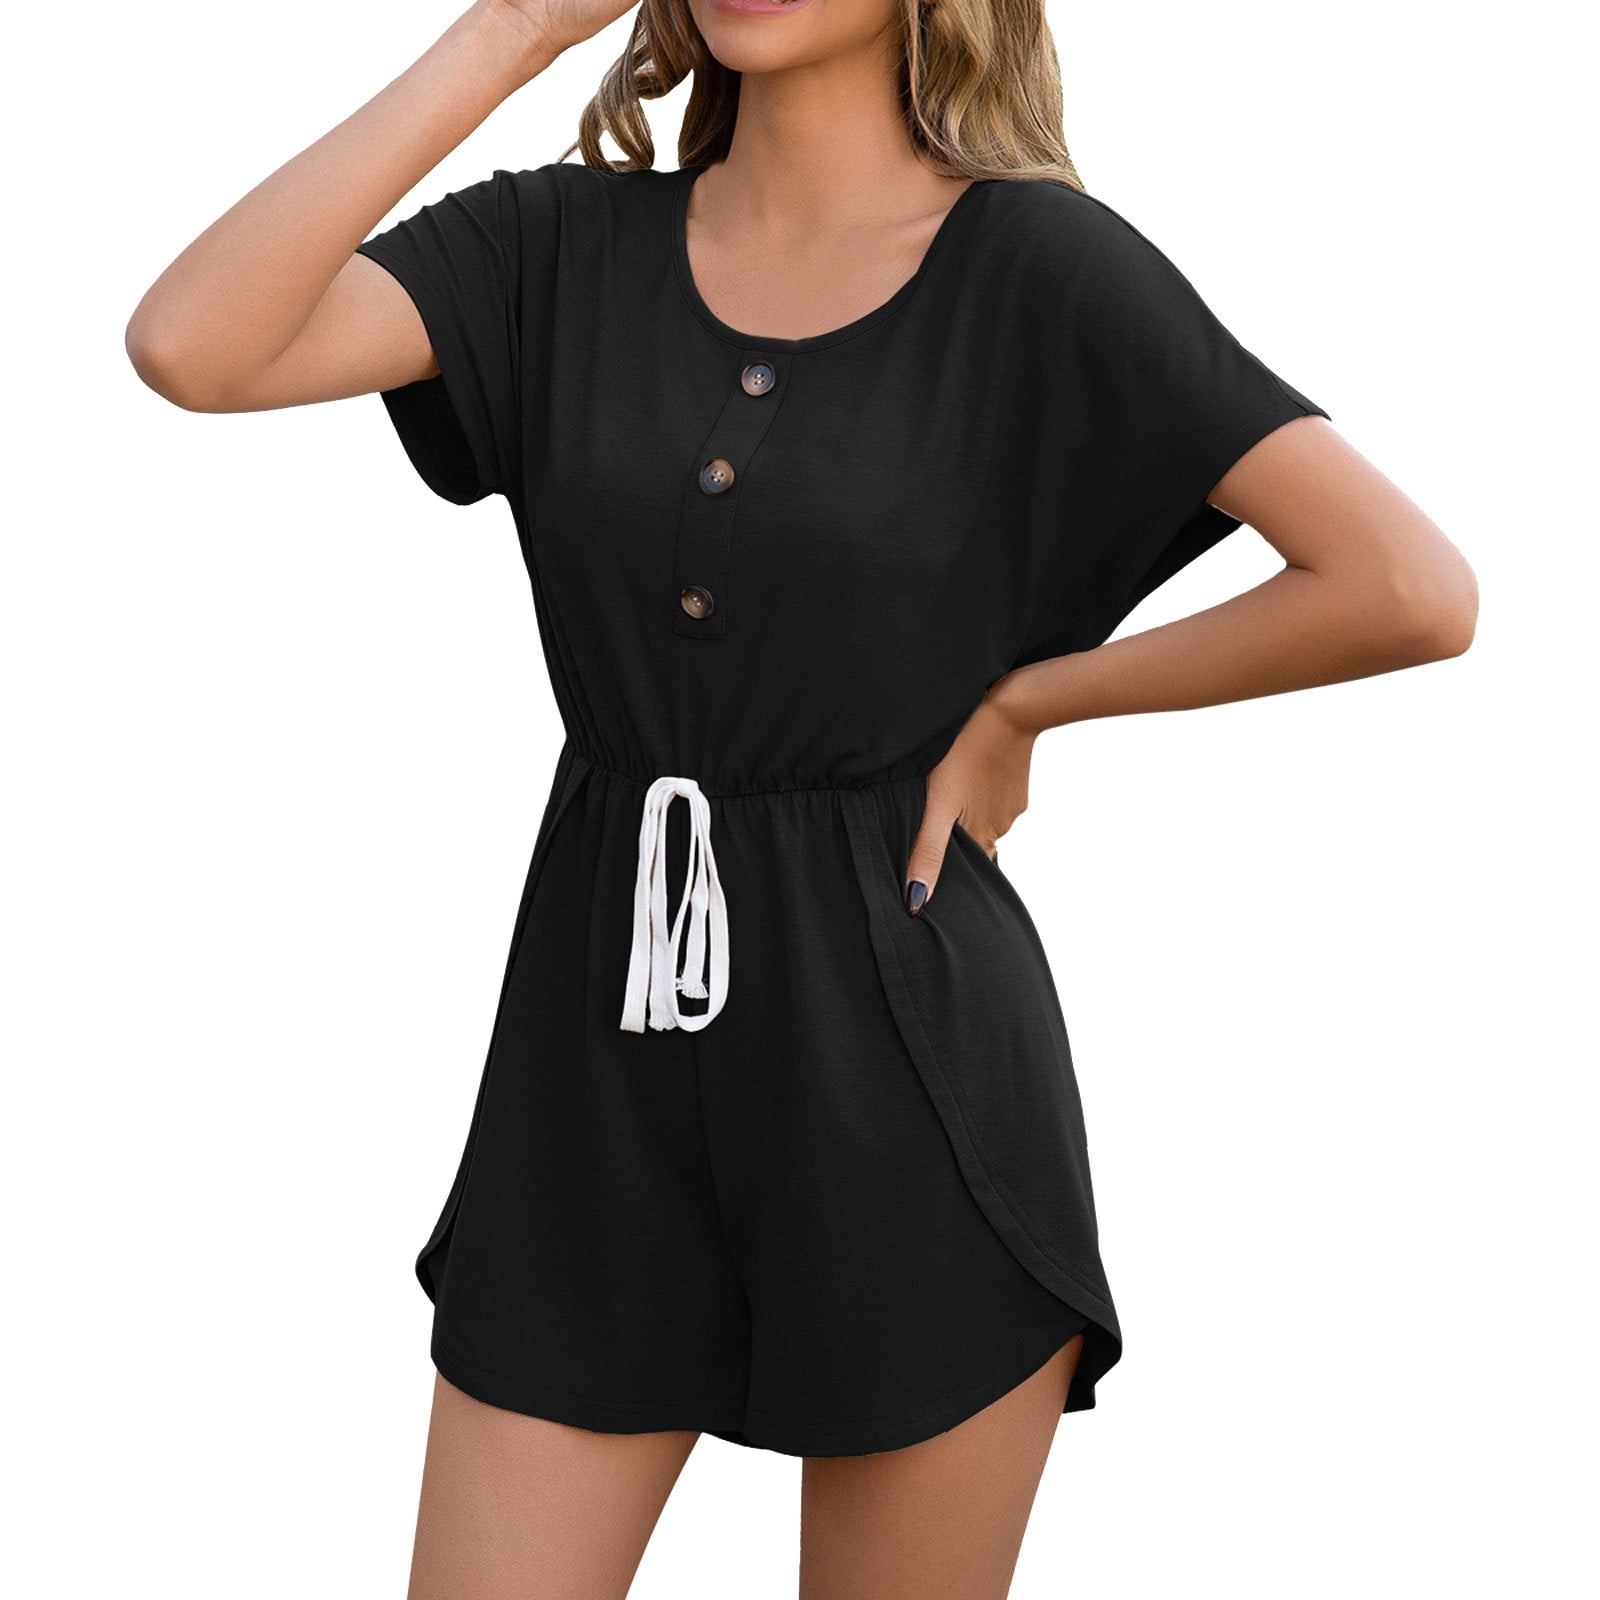 xinqinghao plus size romper women solid color v neck short sleeve ...